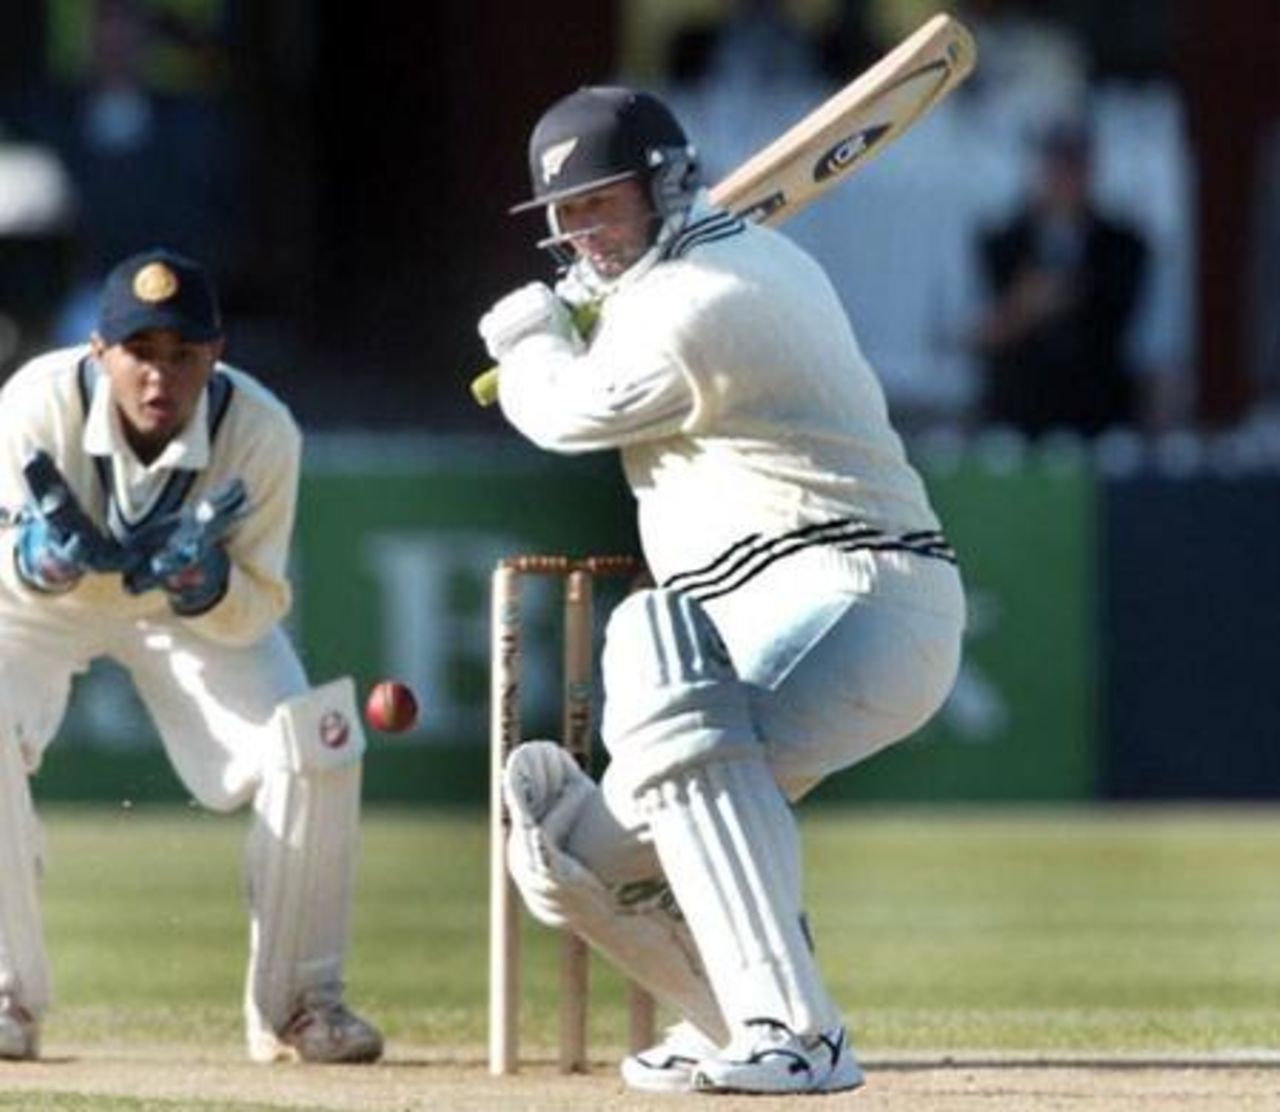 New Zealand batsman Nathan Astle shapes to cut a delivery from Indian bowler Harbhajan Singh during his first innings of 41 as wicket-keeper Parthiv Patel looks on. 1st Test: New Zealand v India at Basin Reserve, Wellington, 12-16 December 2002 (13 December 2002).